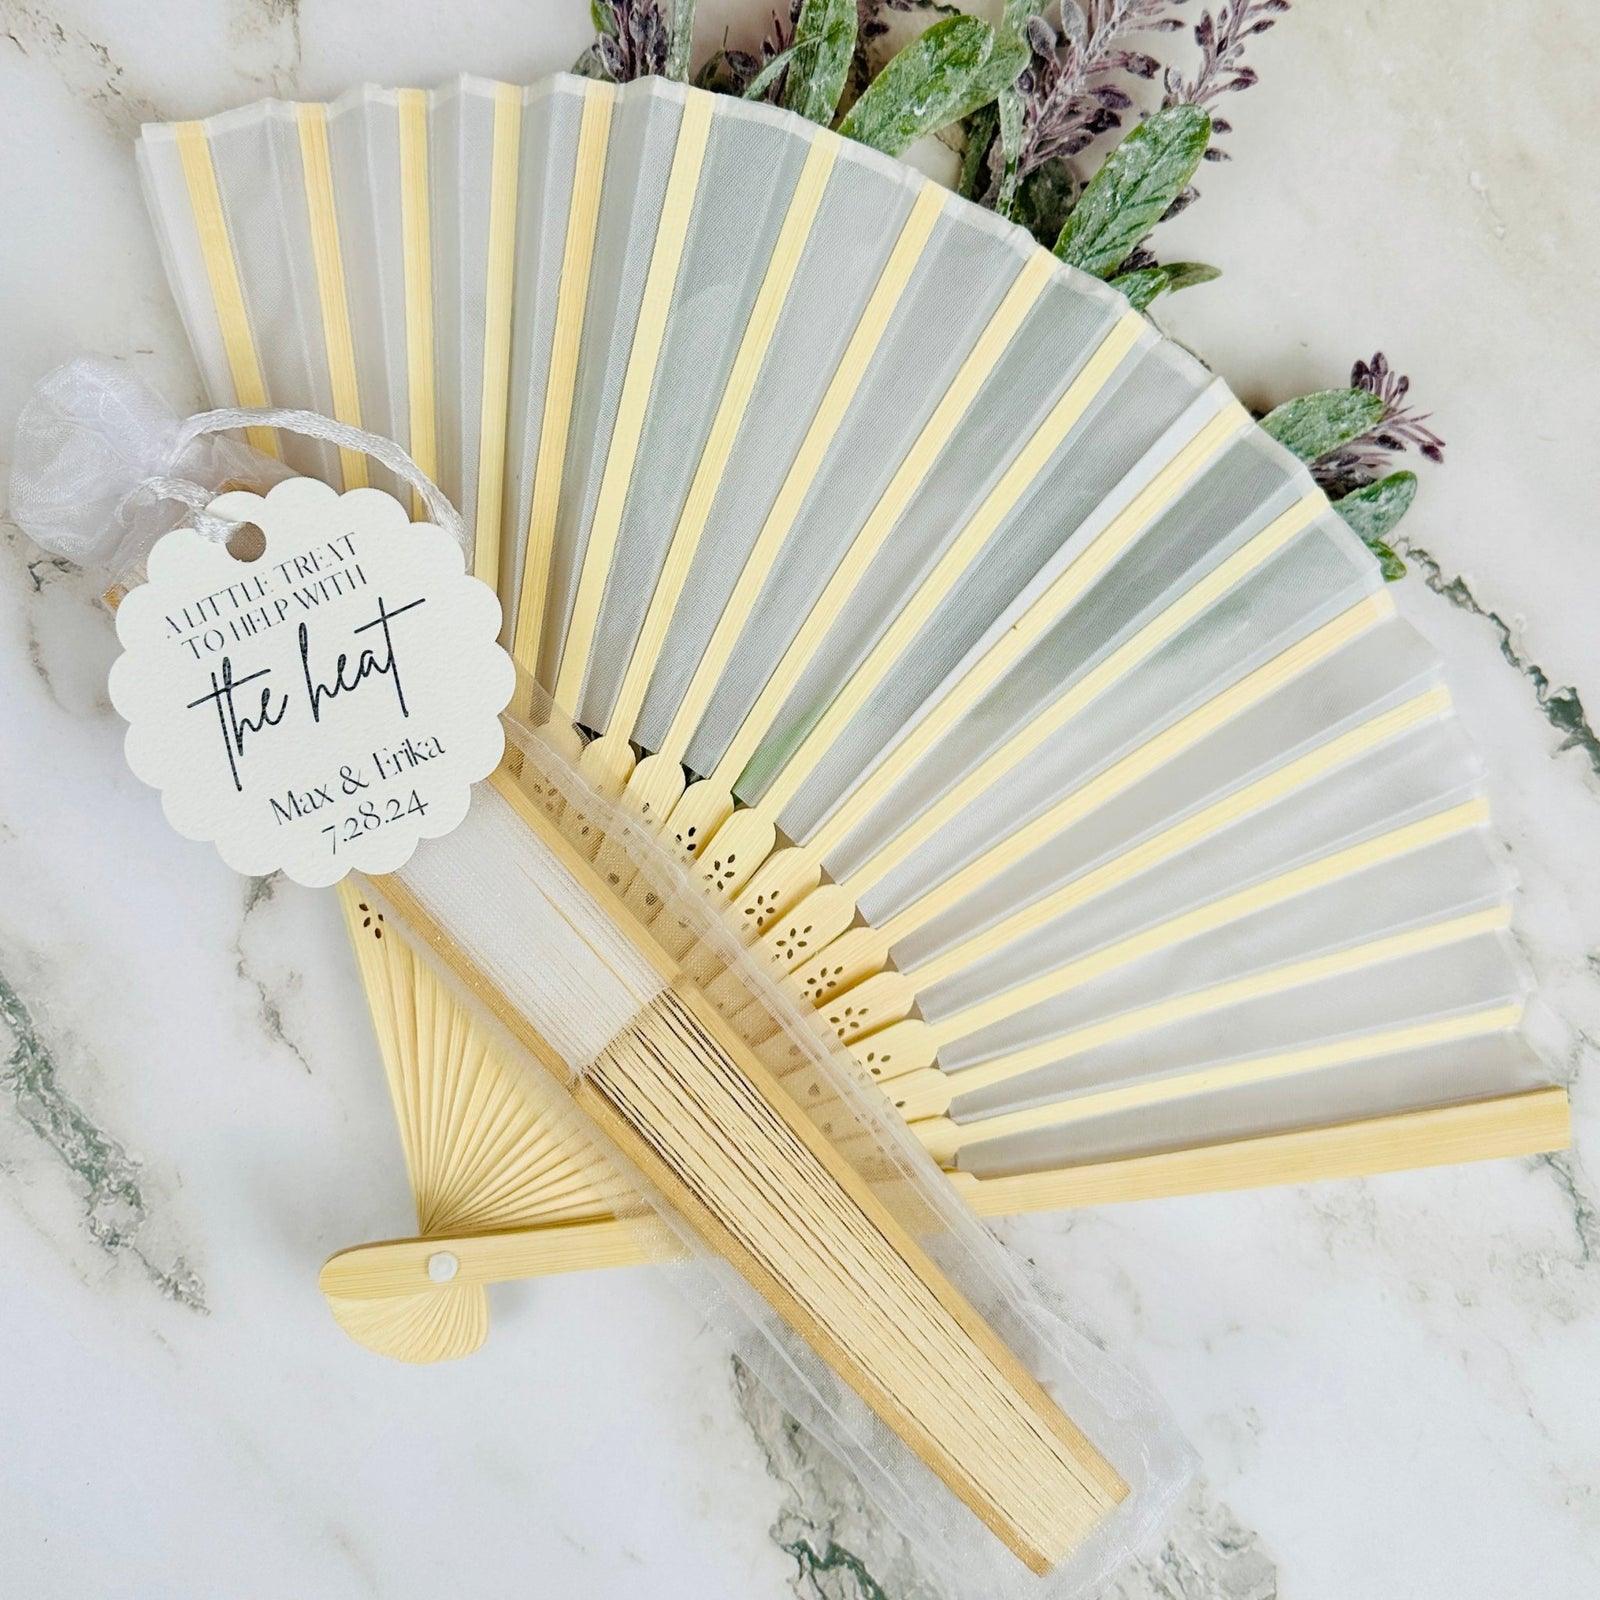 25 Hand Fan Wedding Favors to Keep Your Guests (from $1.39) - Wedding